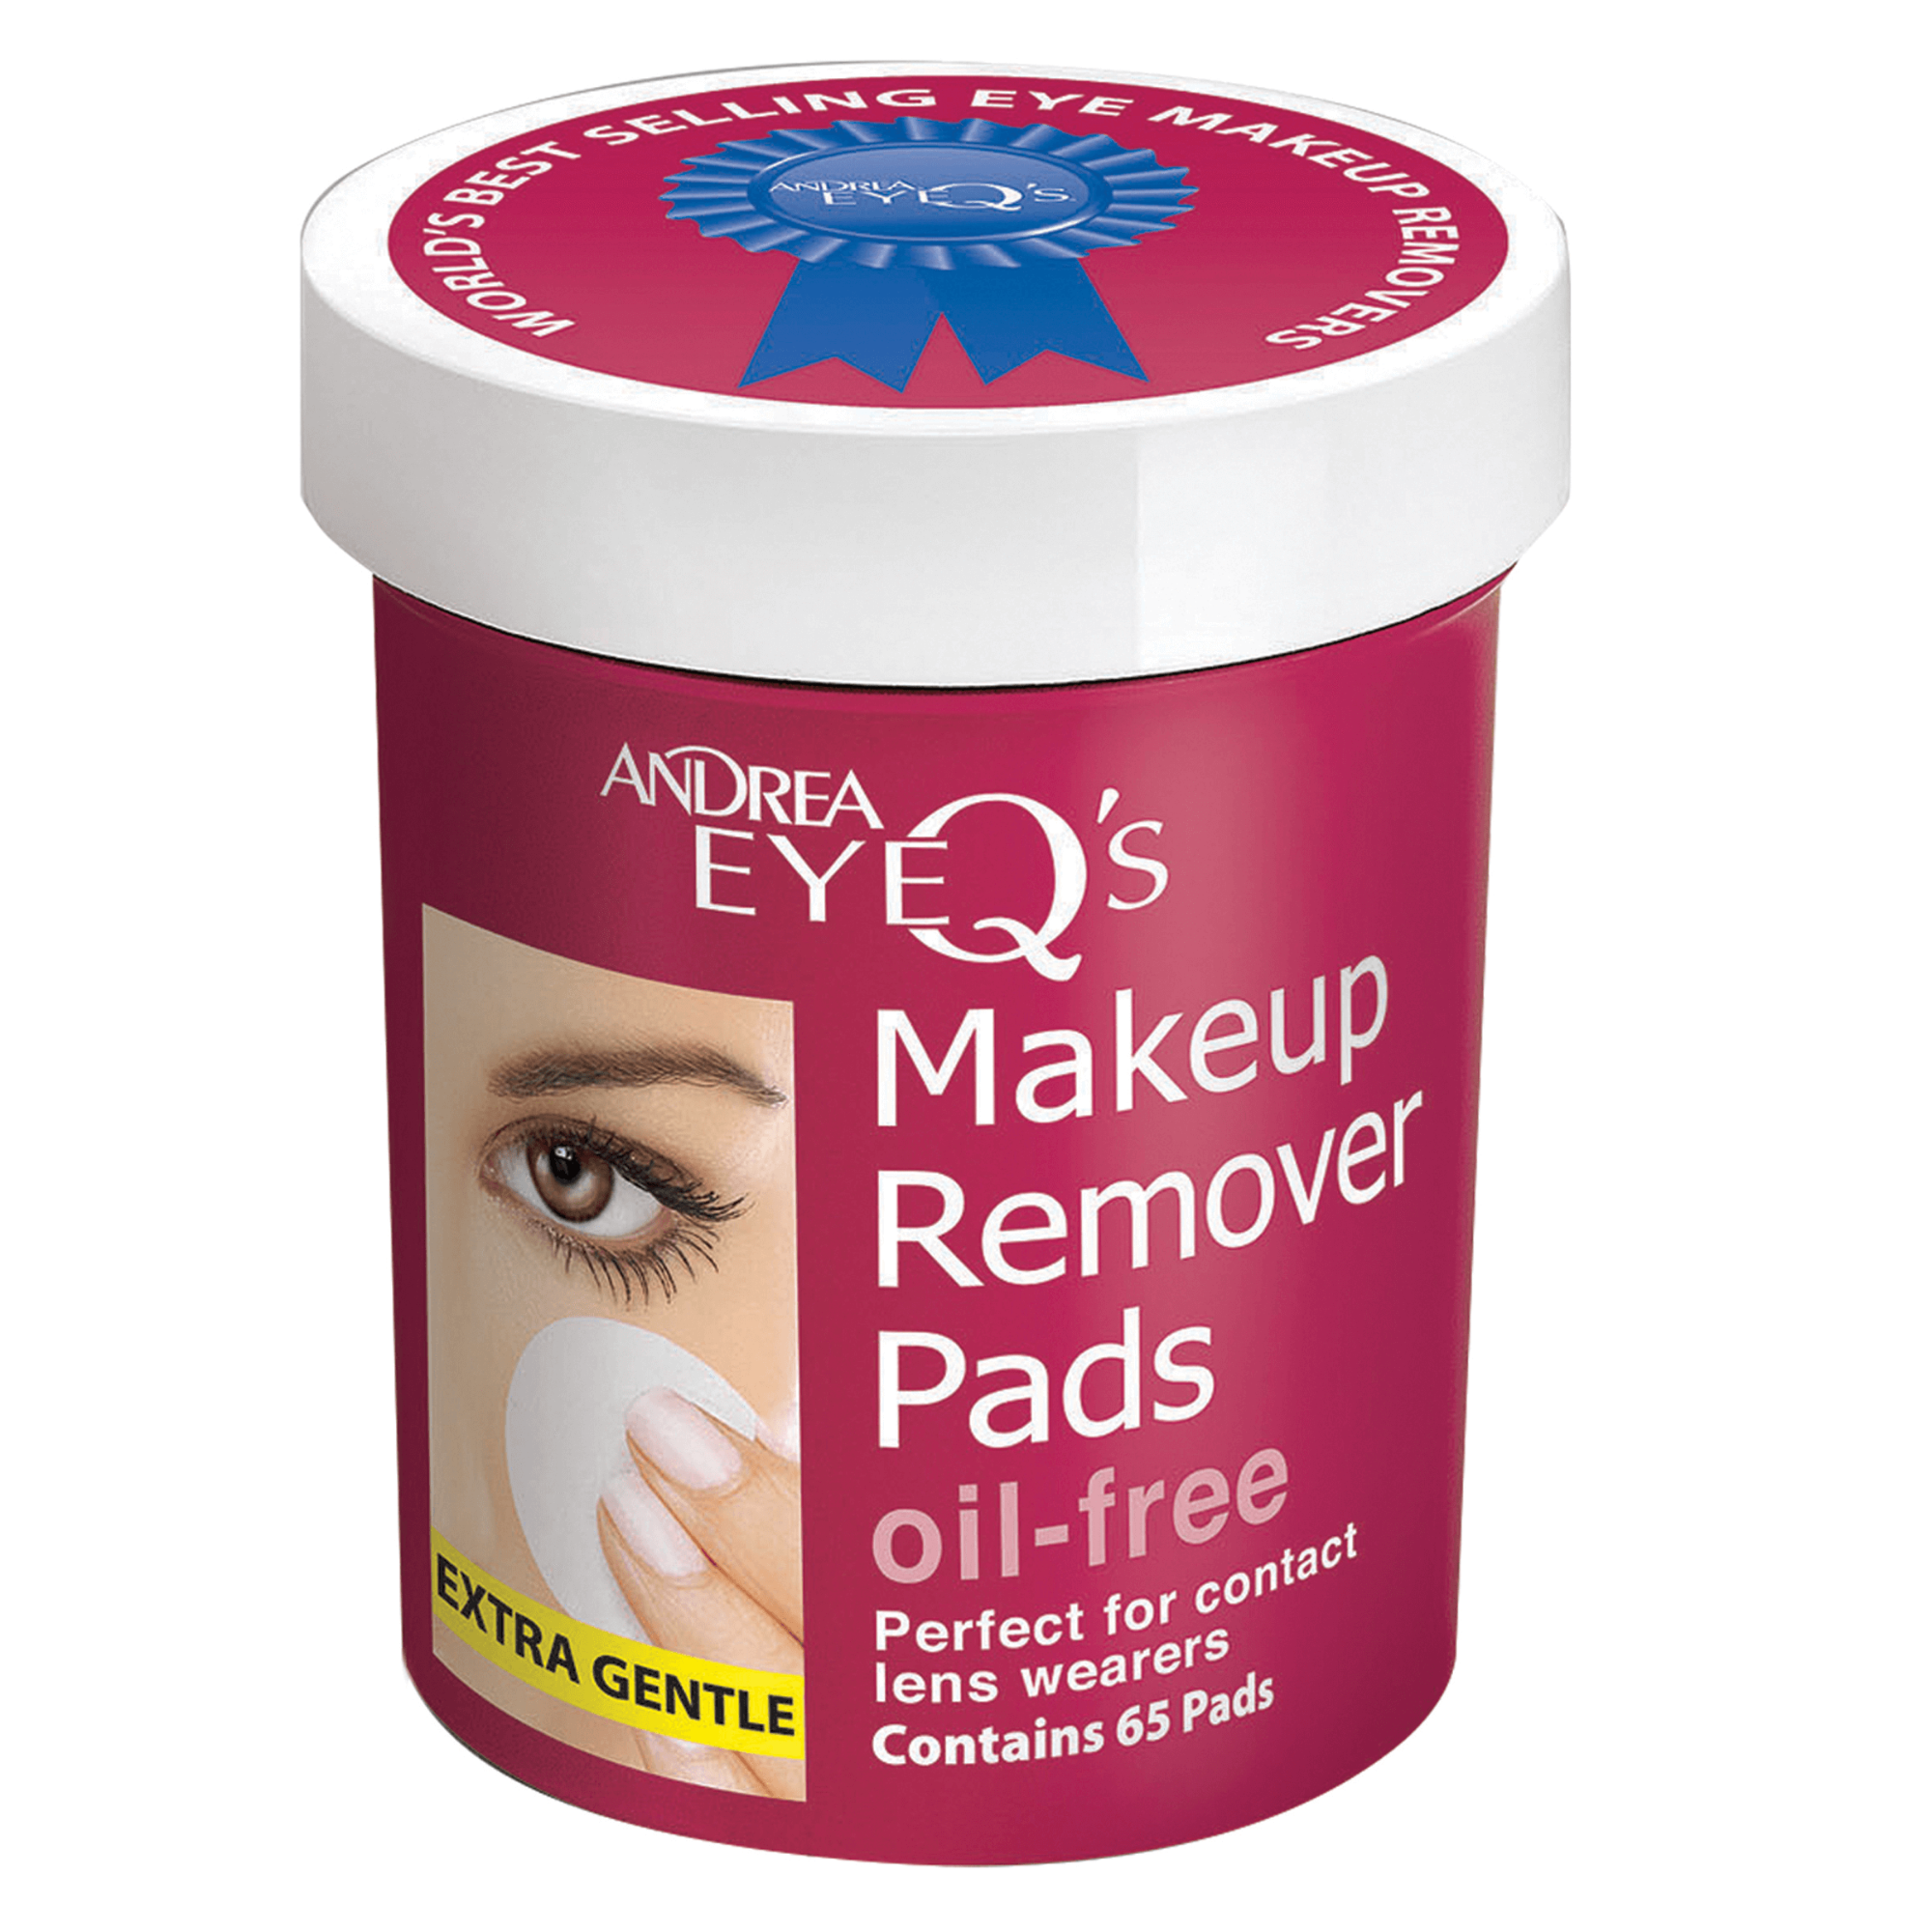 EyeQ’s Makeup Remover Pads, Oil-Free